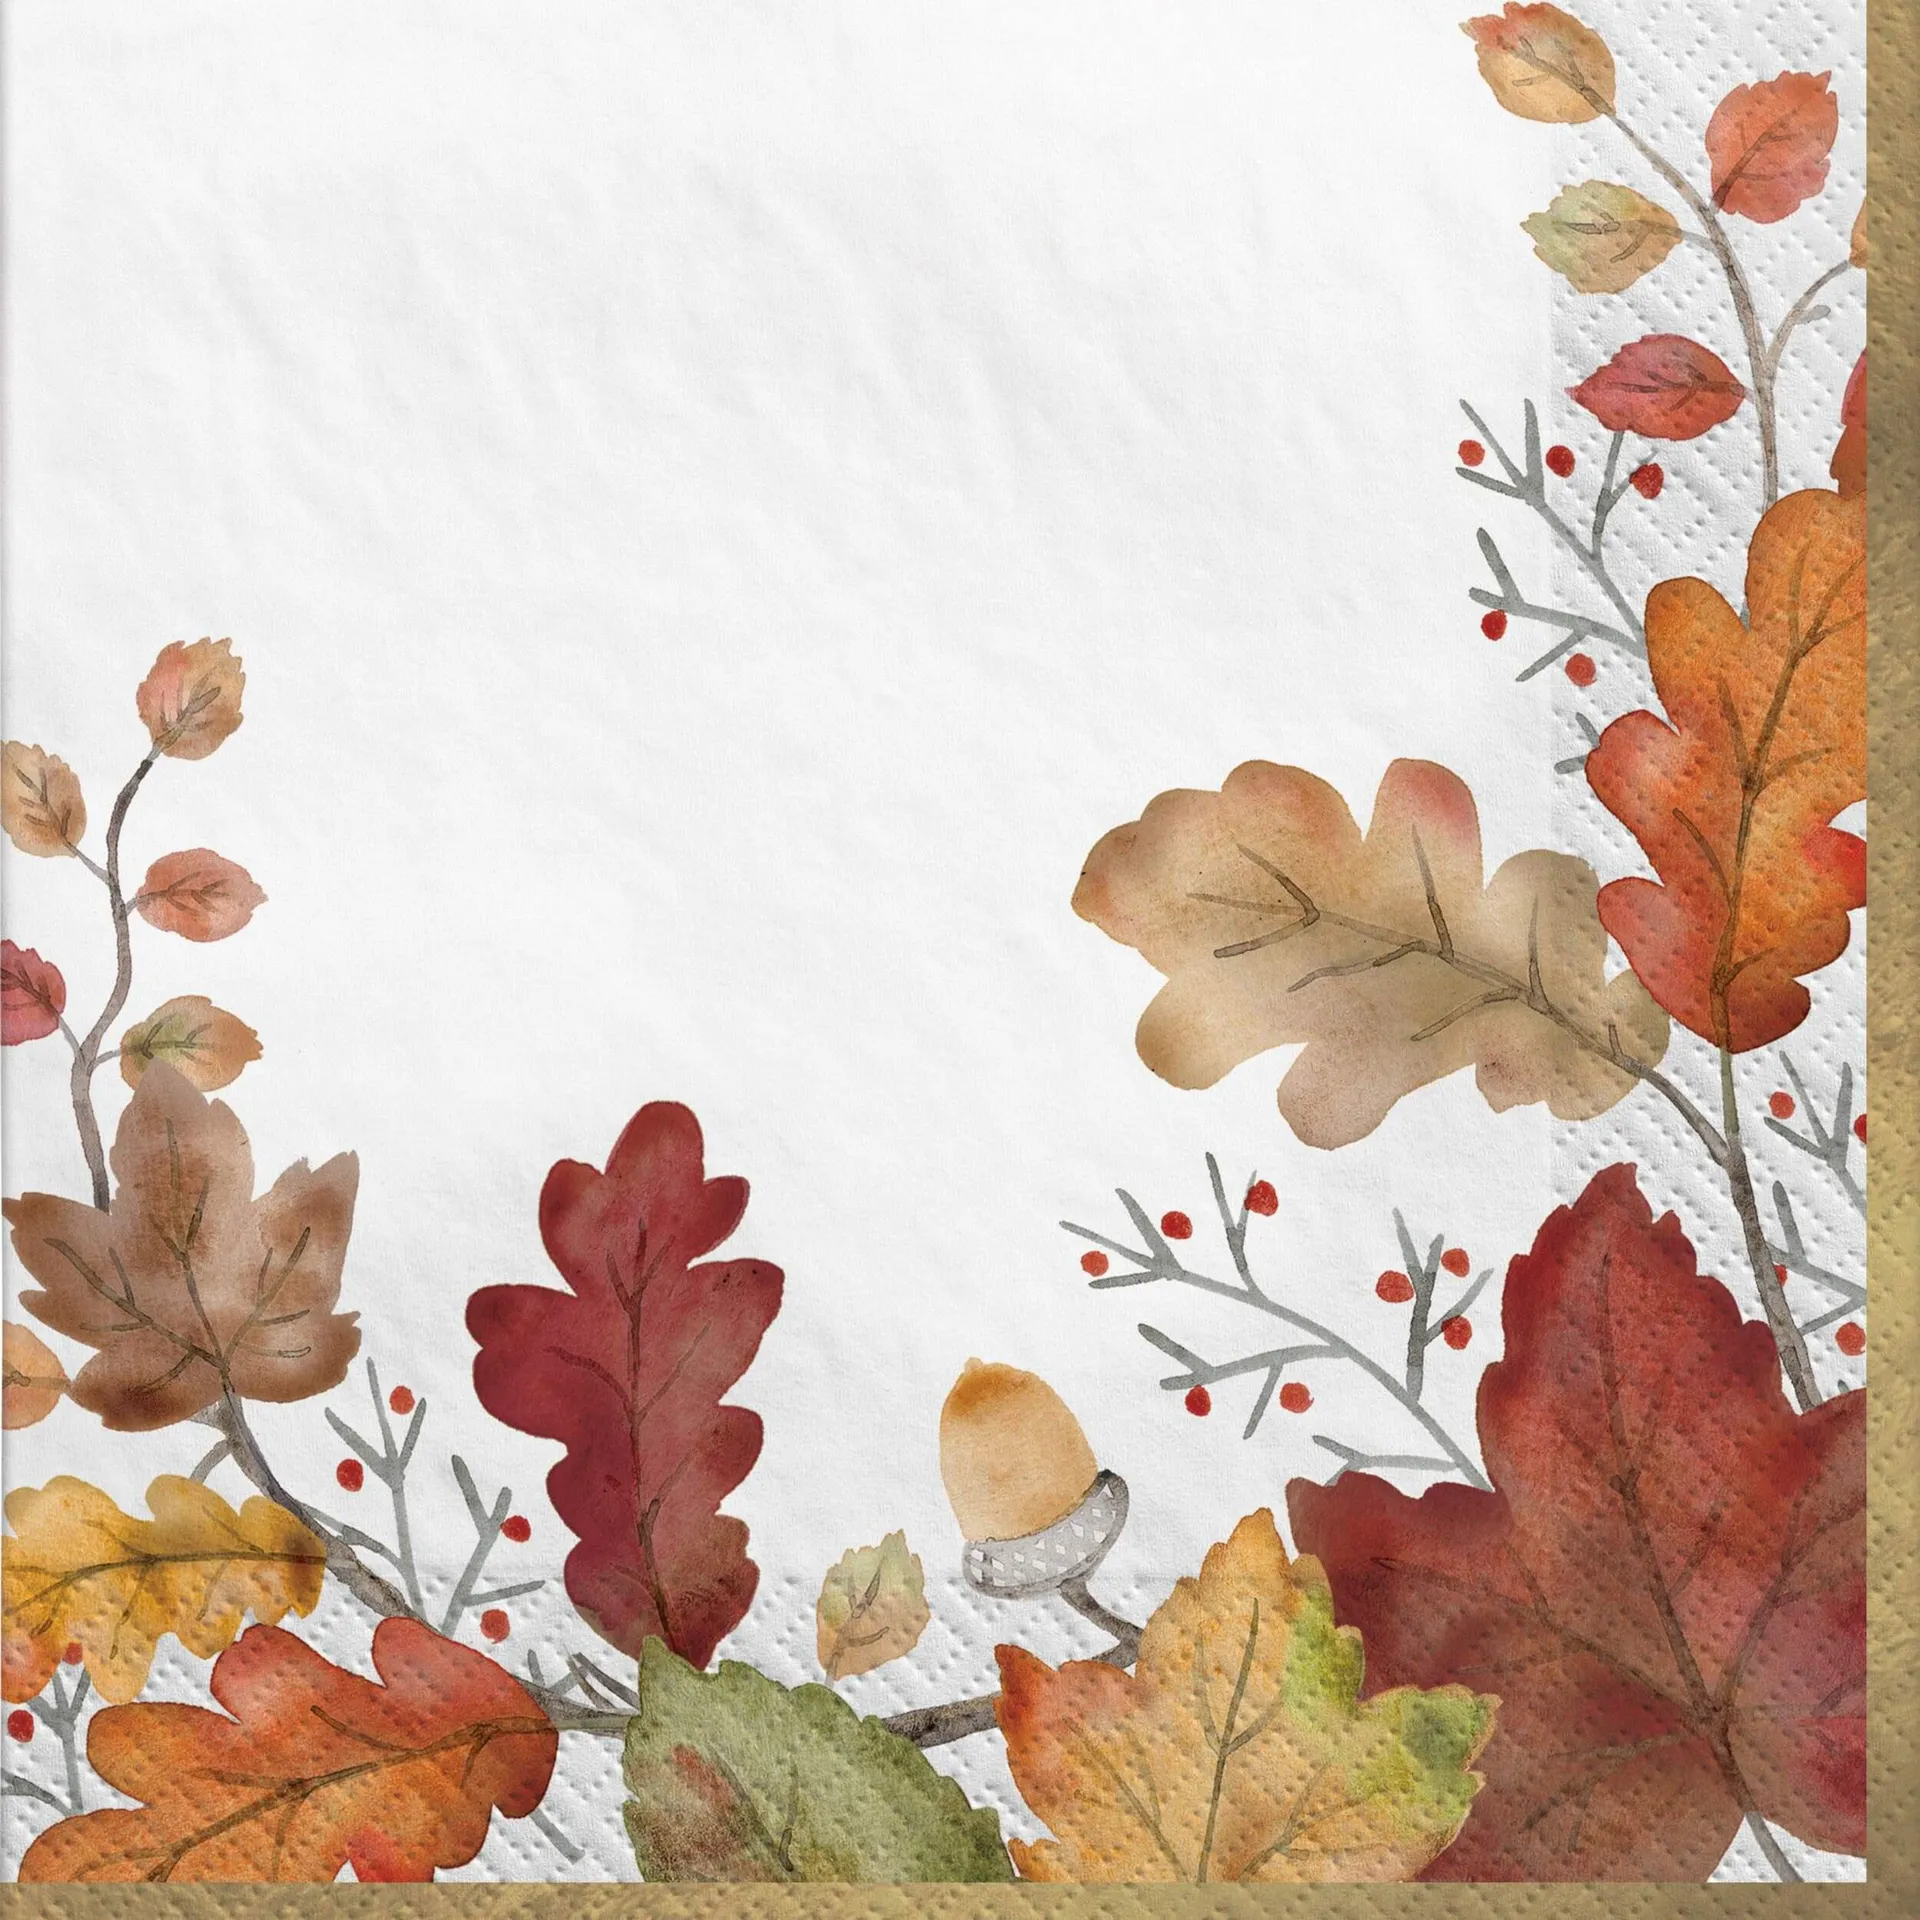 Nature's Harvest Square Paper Disposable Dinner Napkins, White Multi-Coloured, Fall Leaves, 8-in, 36-pk, 2-ply, for Fall